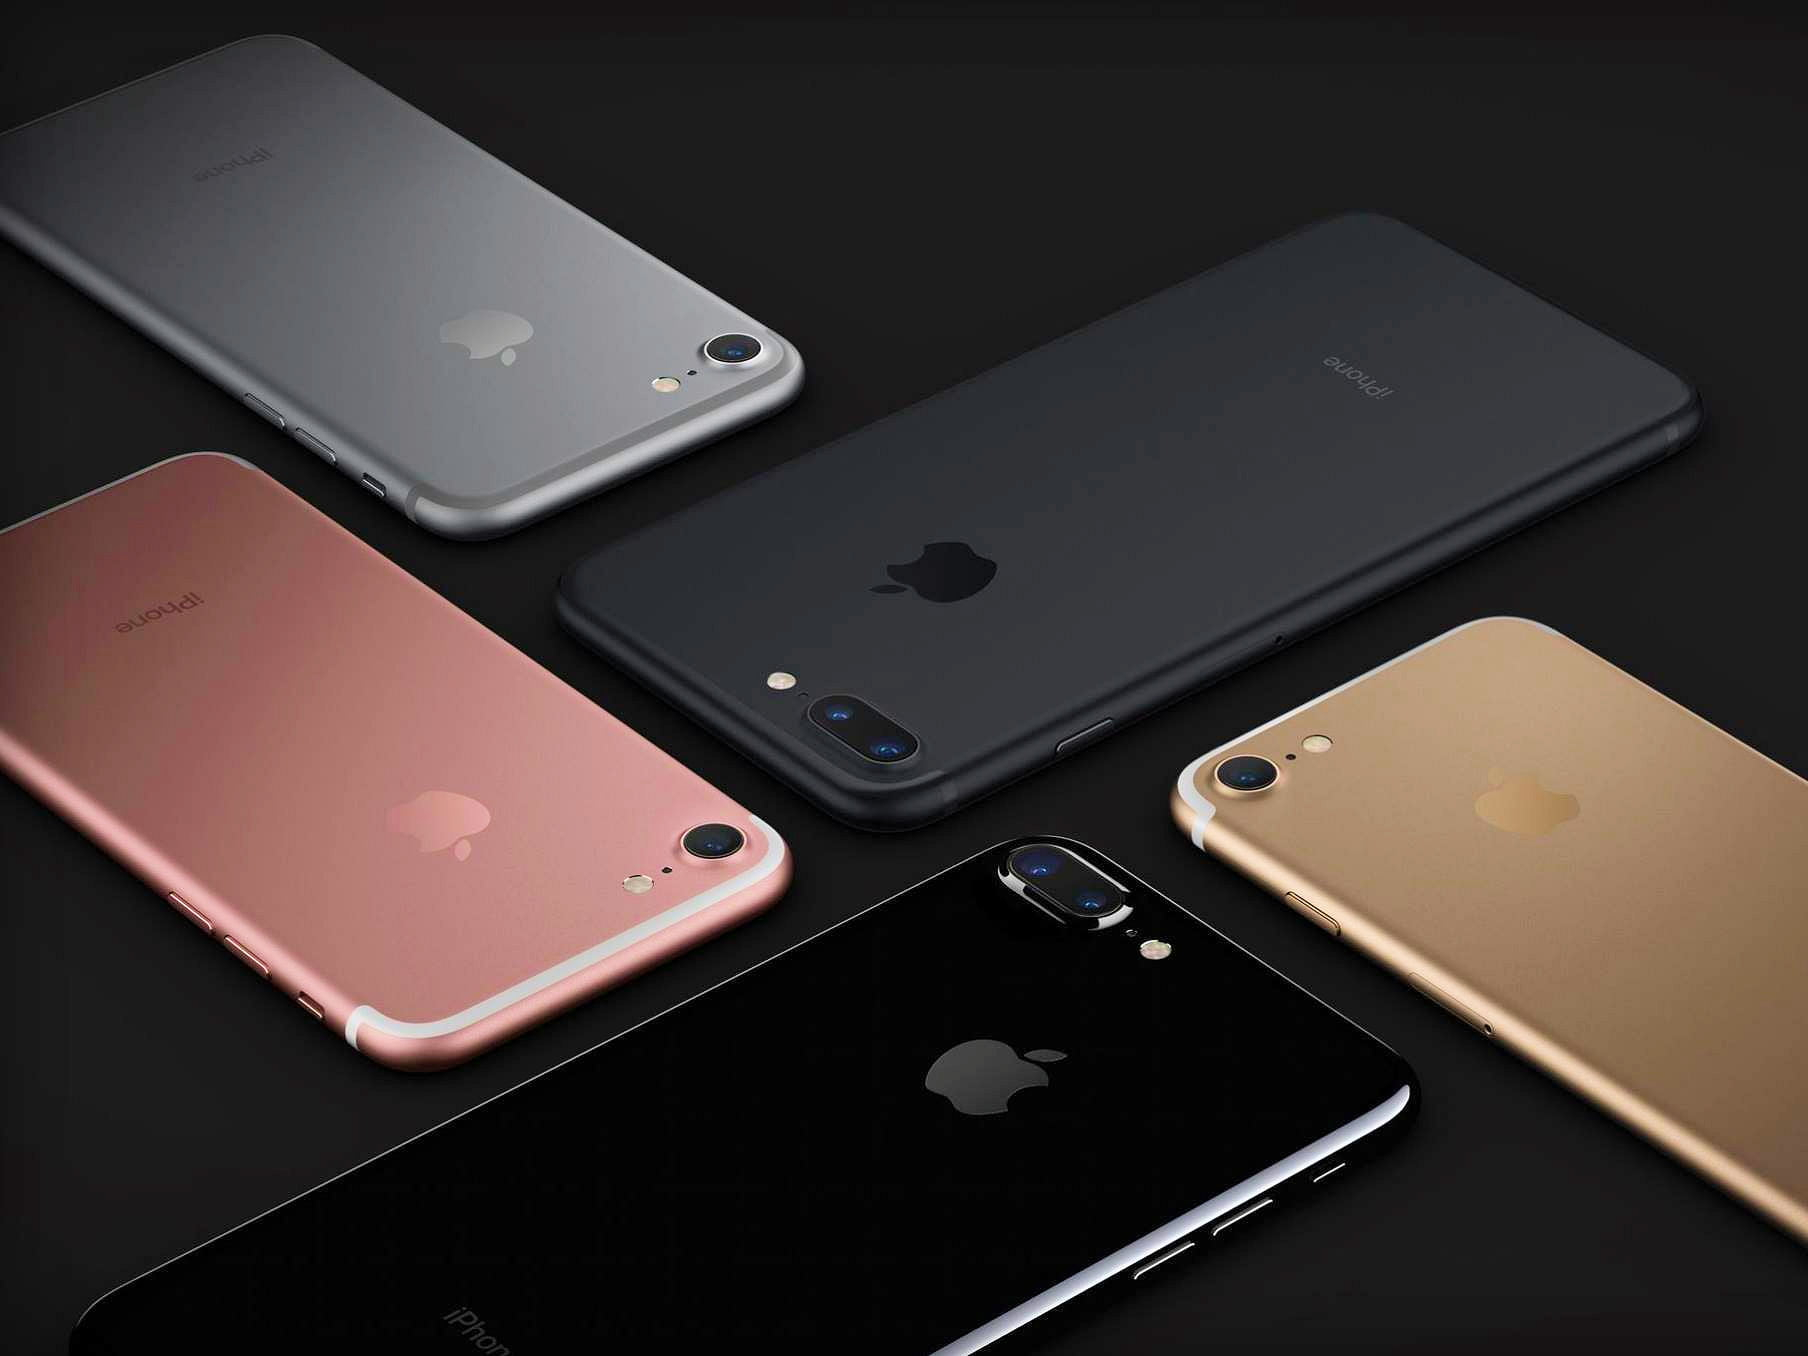 Wallpaper five rose gold, silver, gold, jet black, and black iPhone 7's